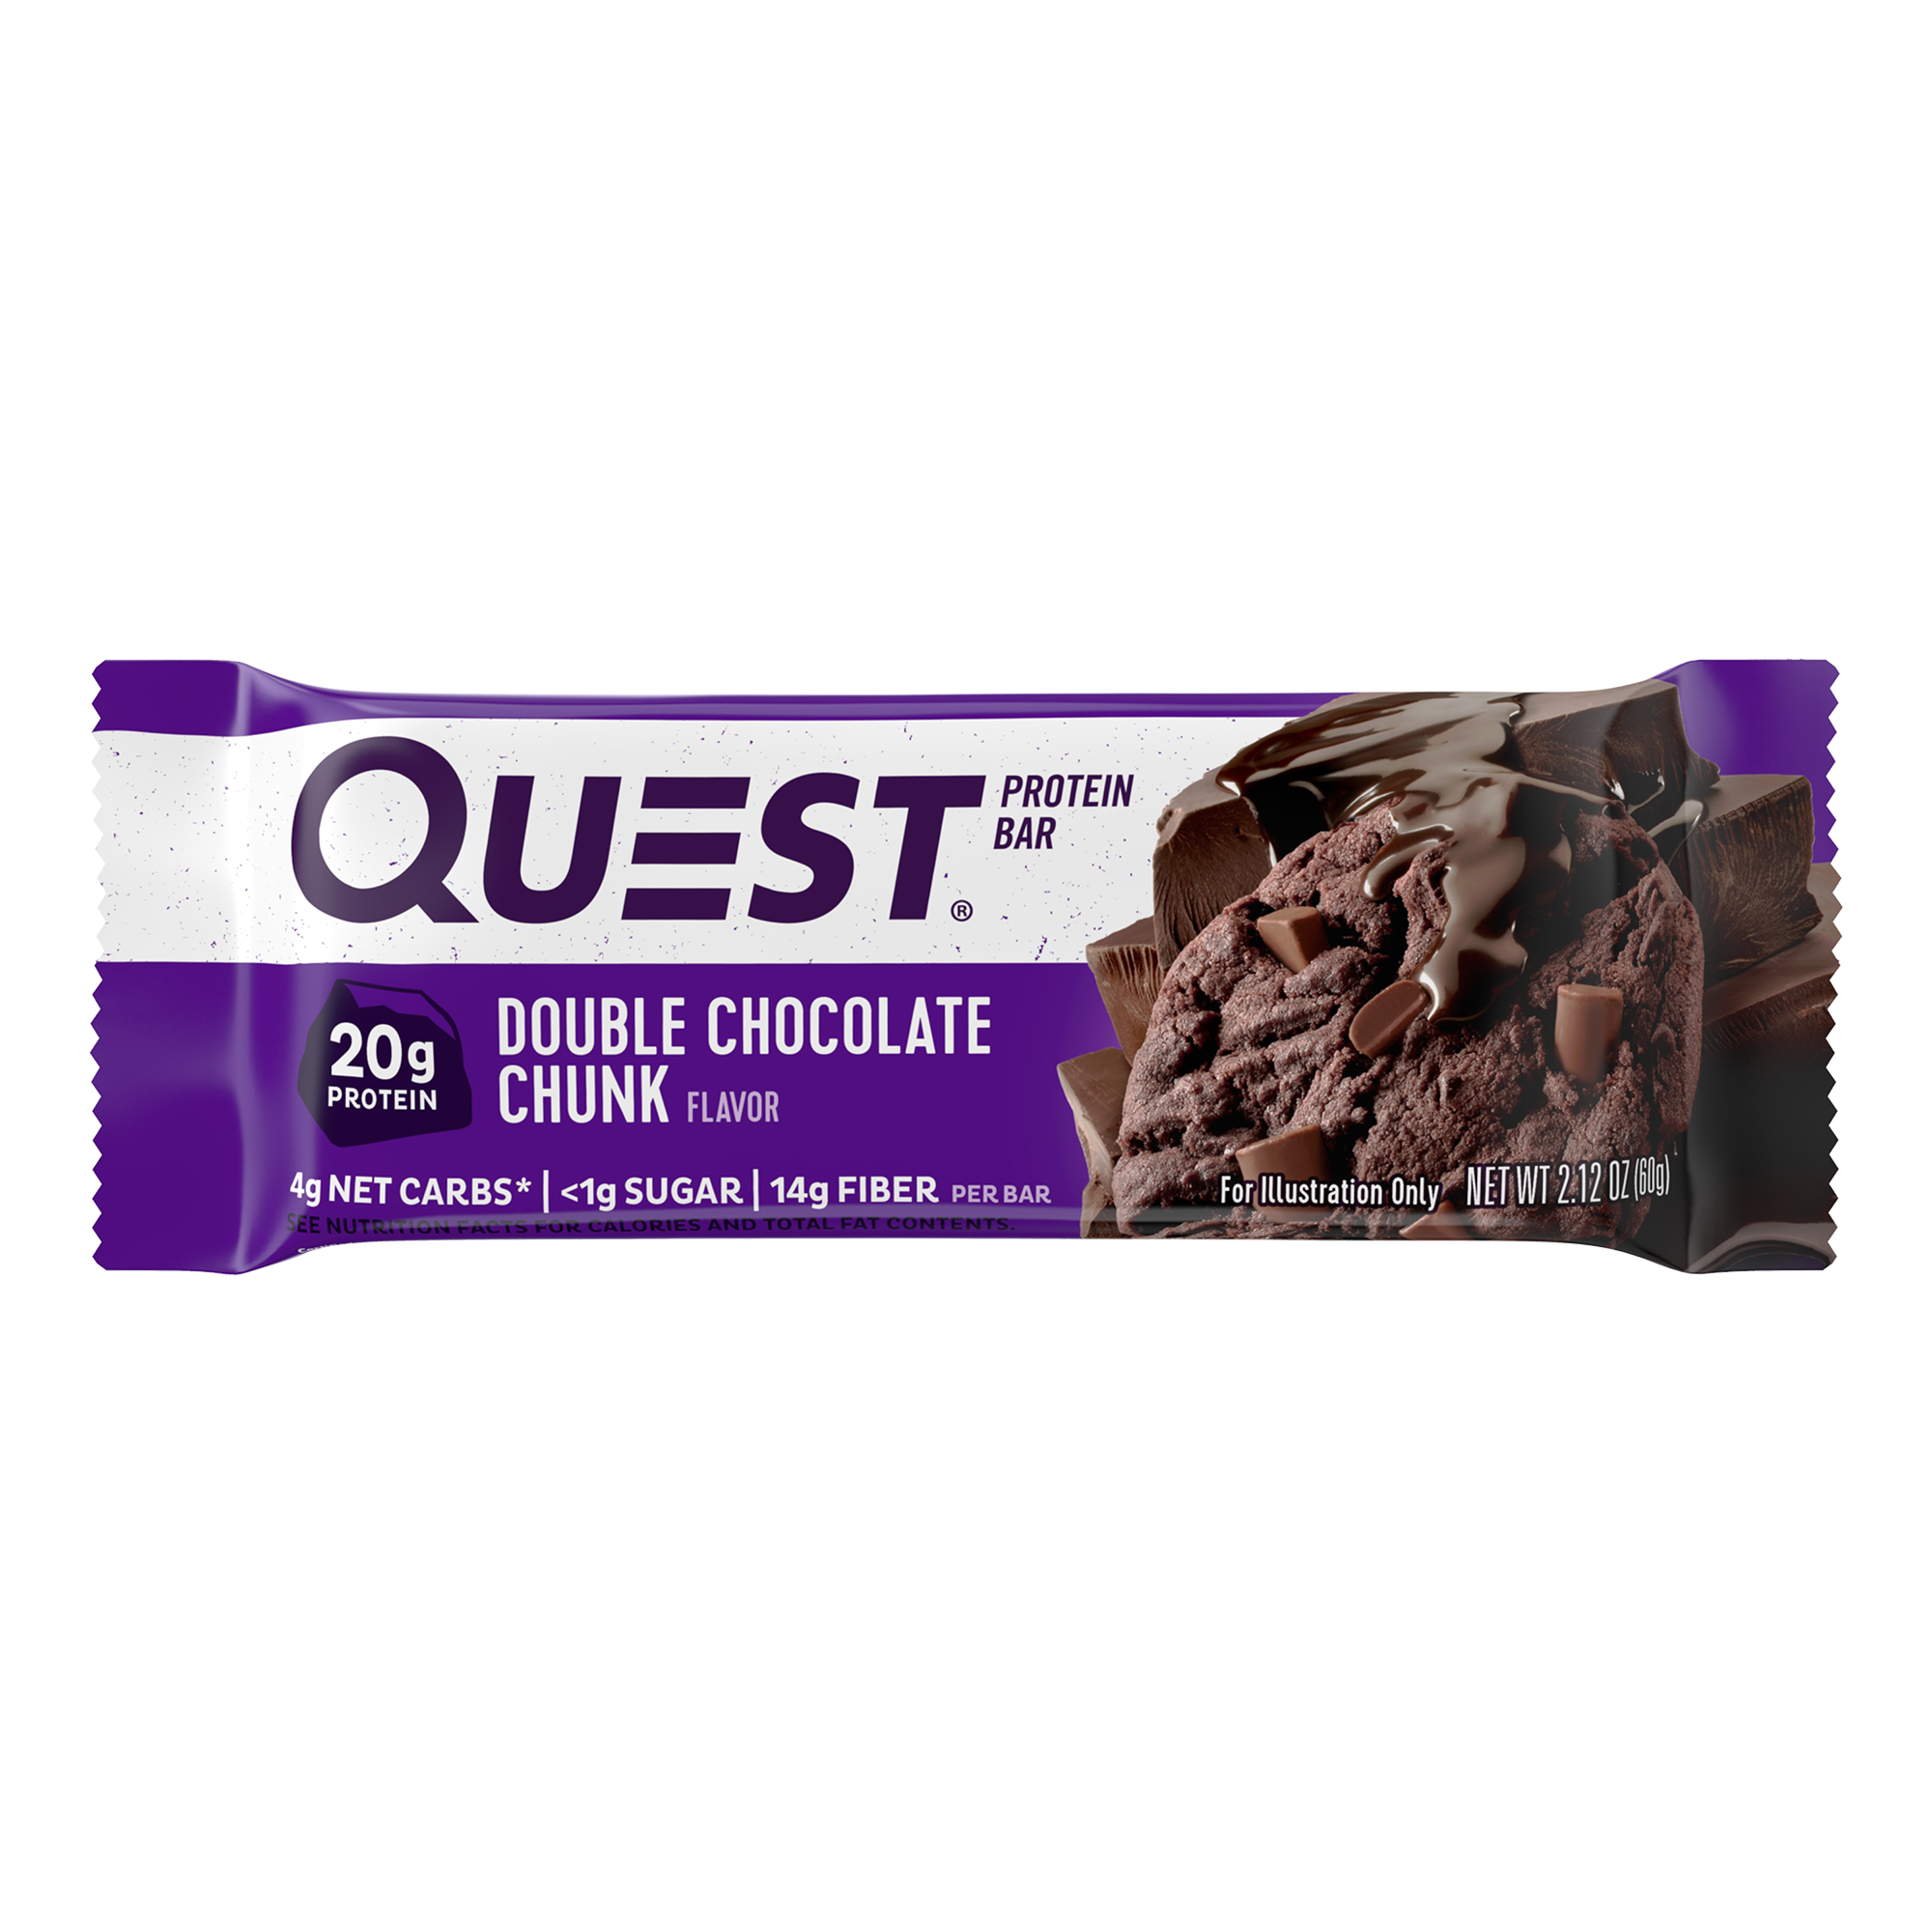 Quest Protein Bar, Double Chocolate Chunk, 20g Protein, 4 Ct - image 4 of 9